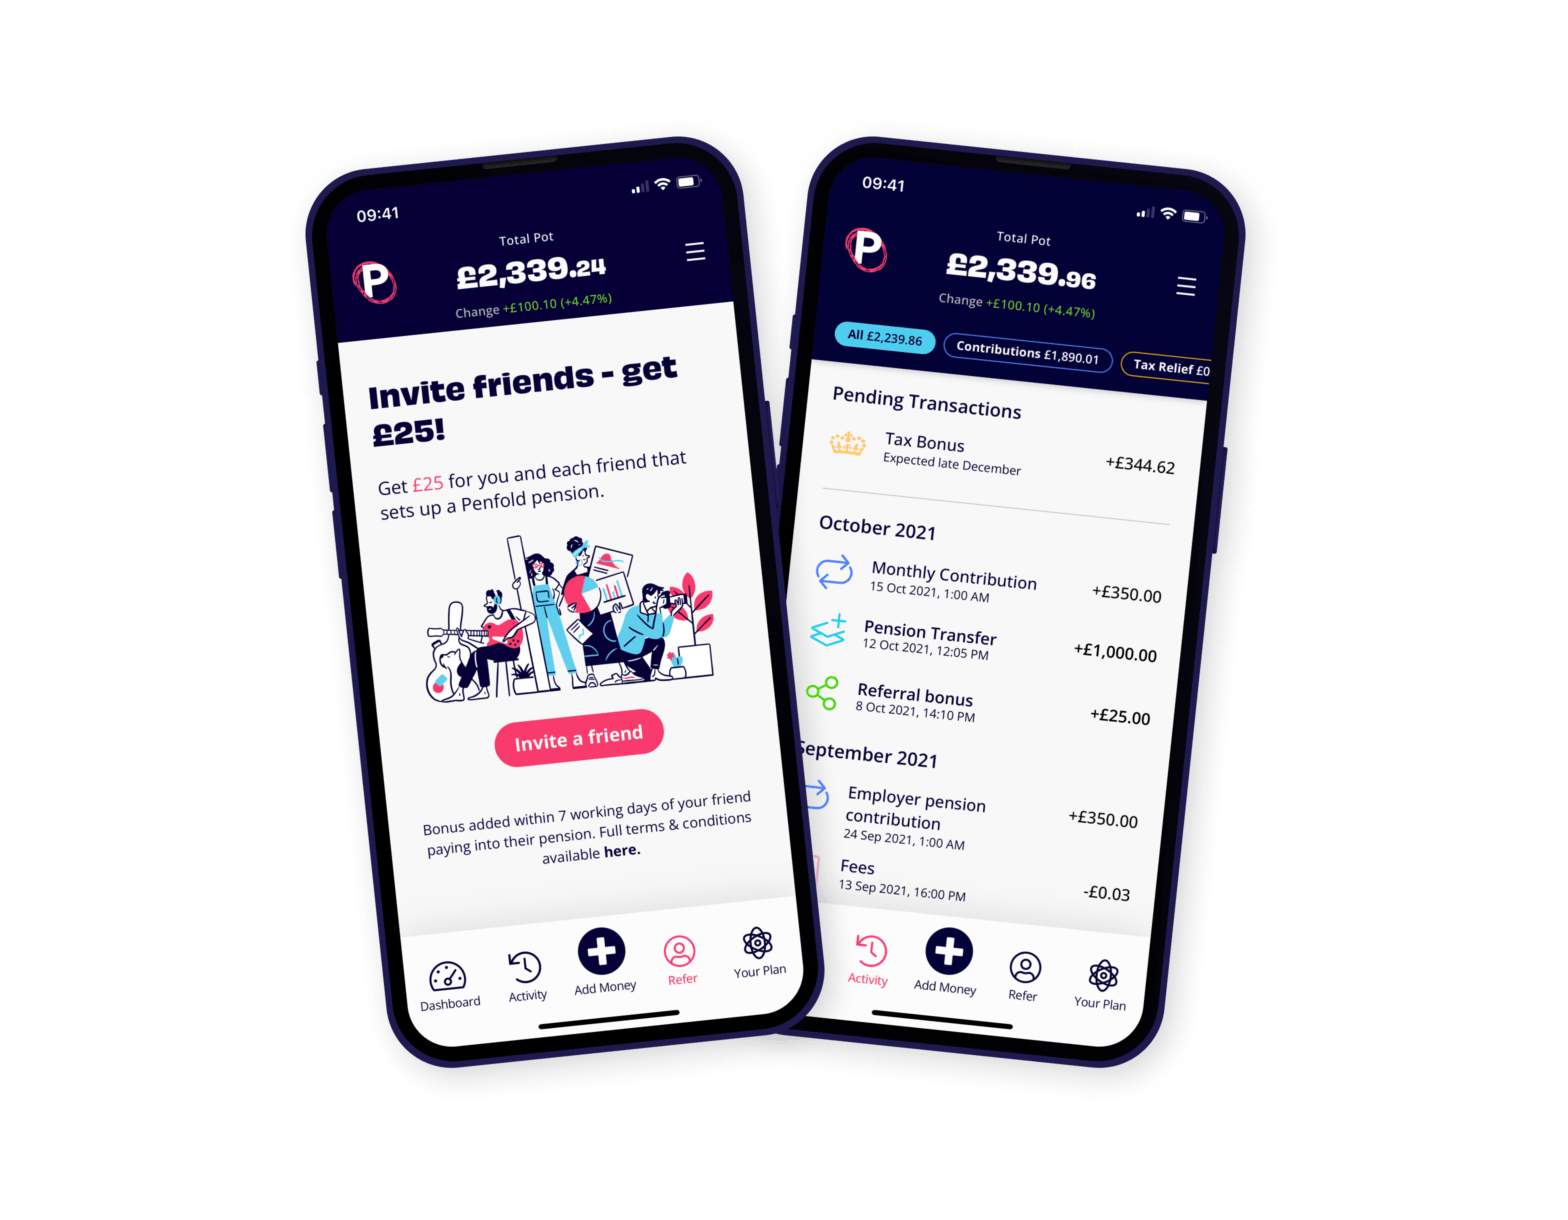 Penfold pension refer a friend and savings activity app screens